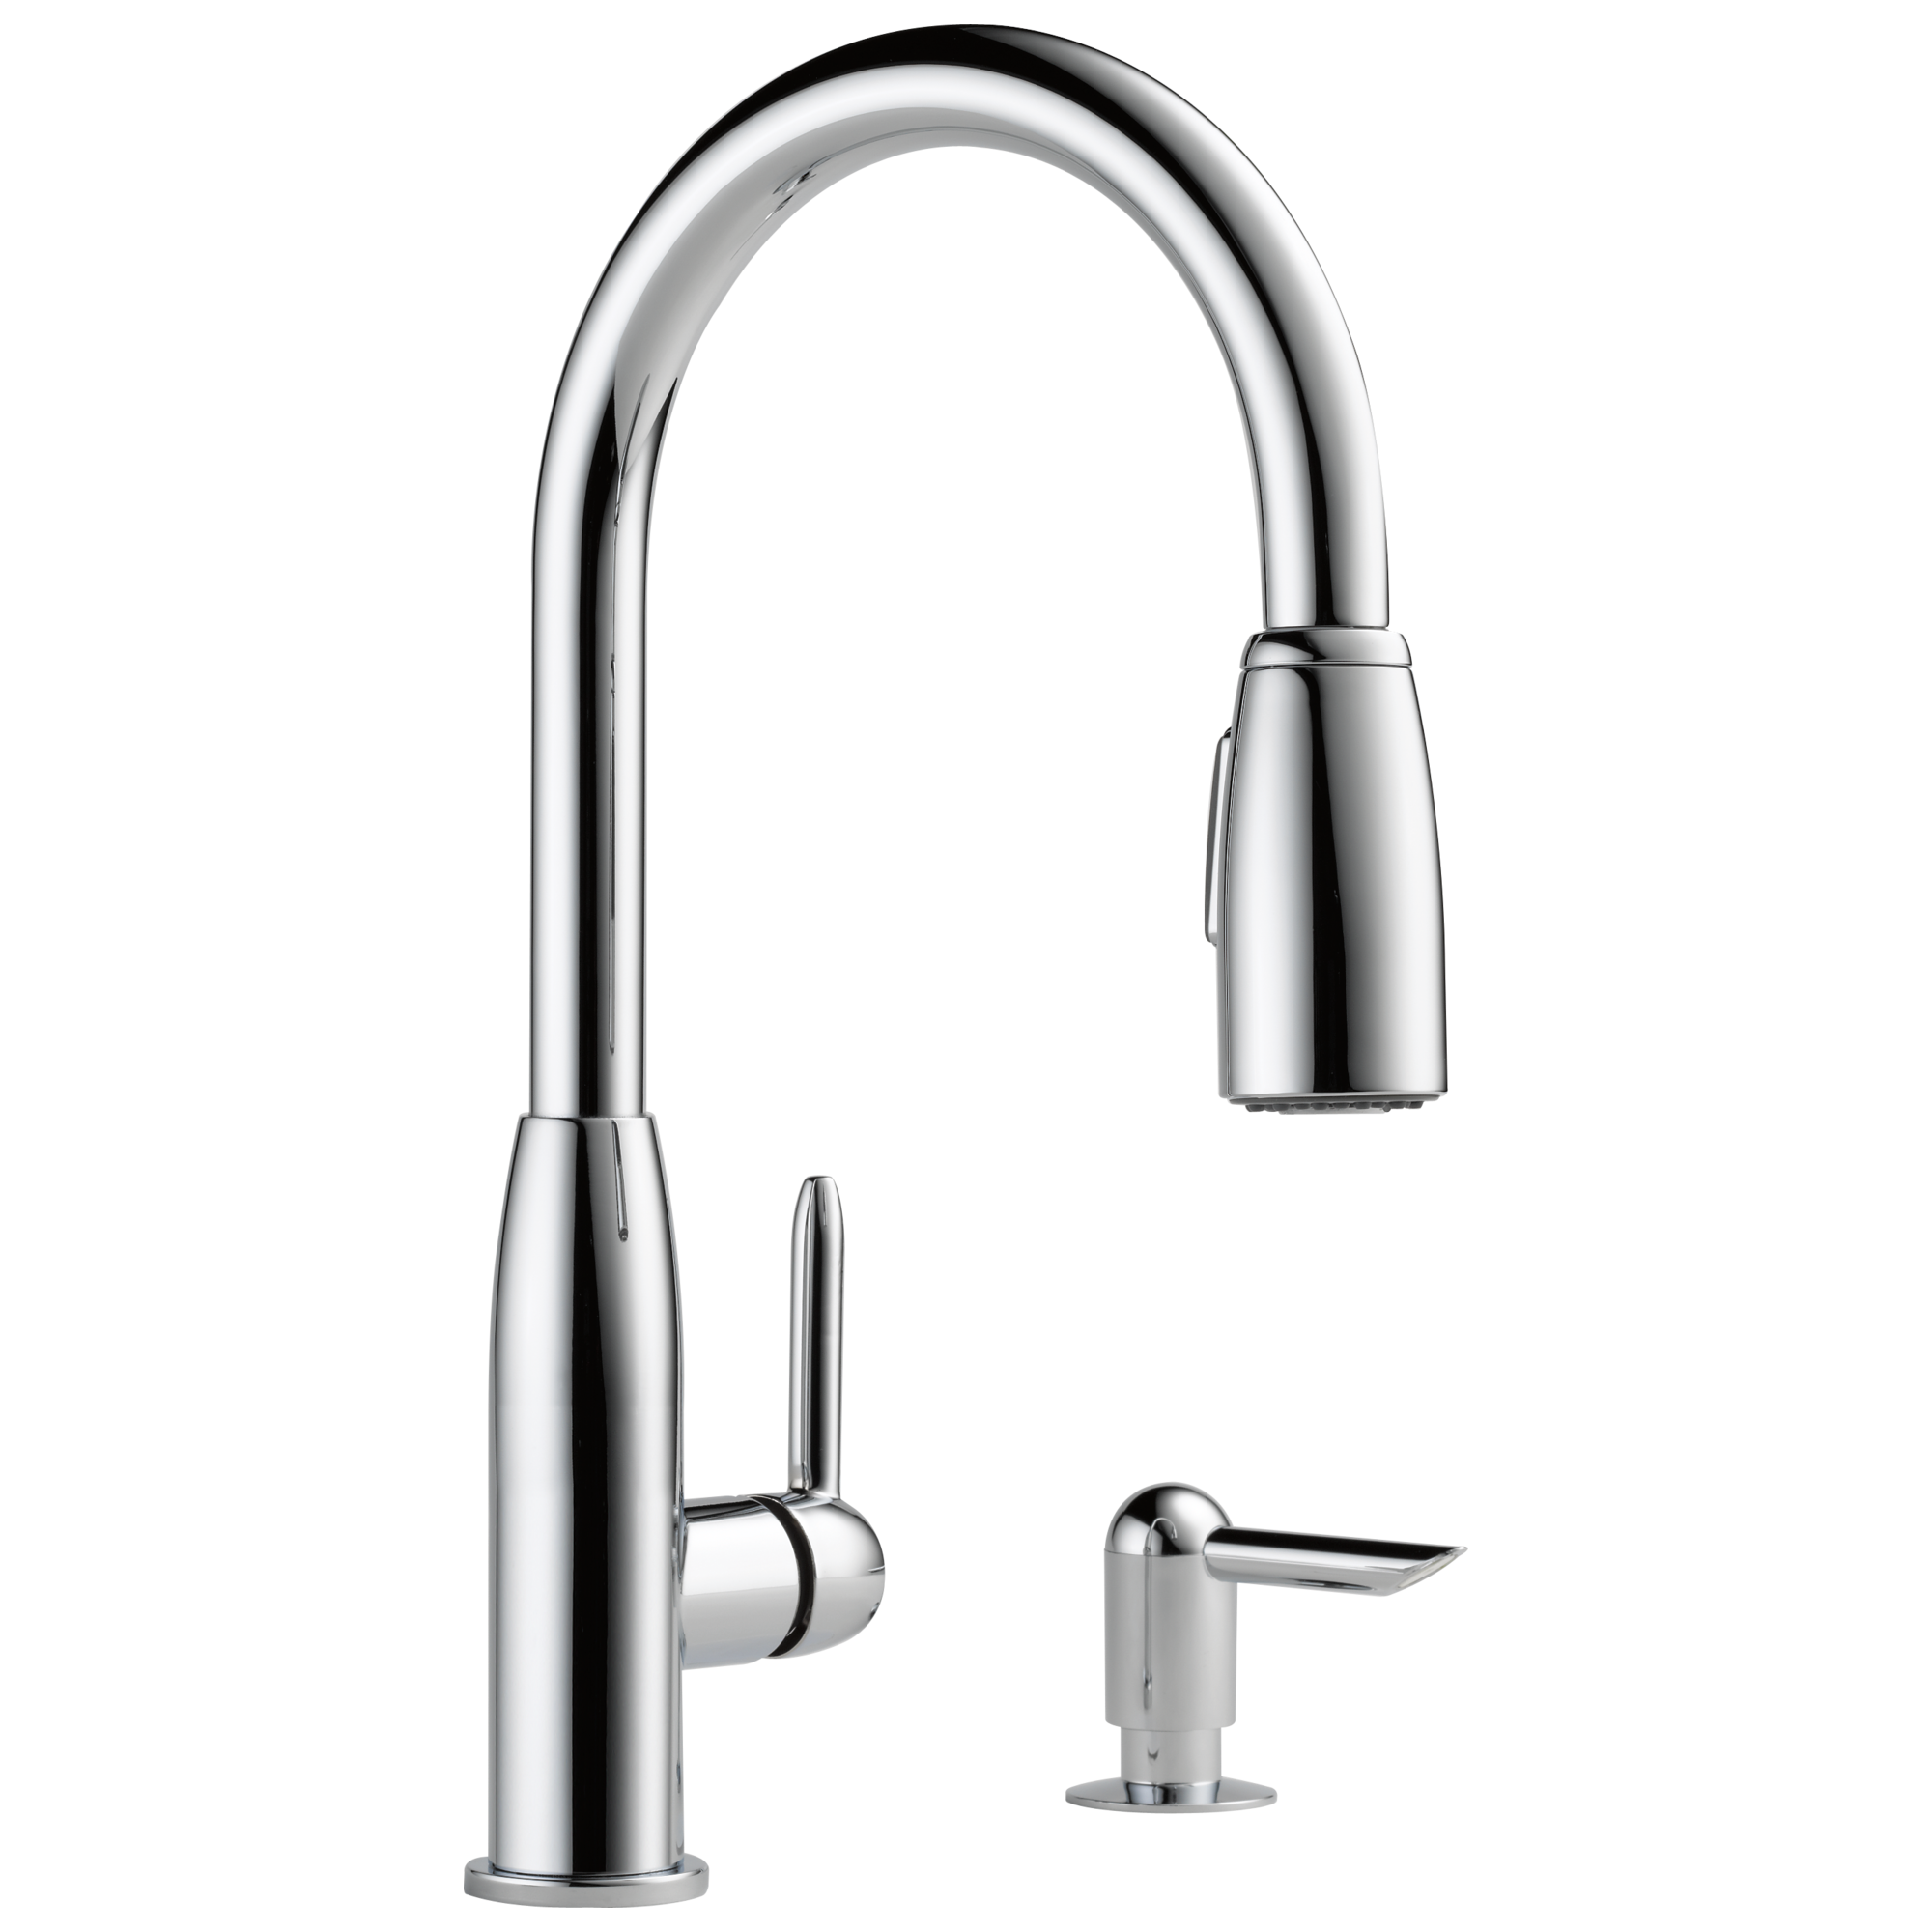 Peerless Core Kitchen Single Handle Pull-Down Faucet in Chrome P88103LF-SD-L - image 1 of 11